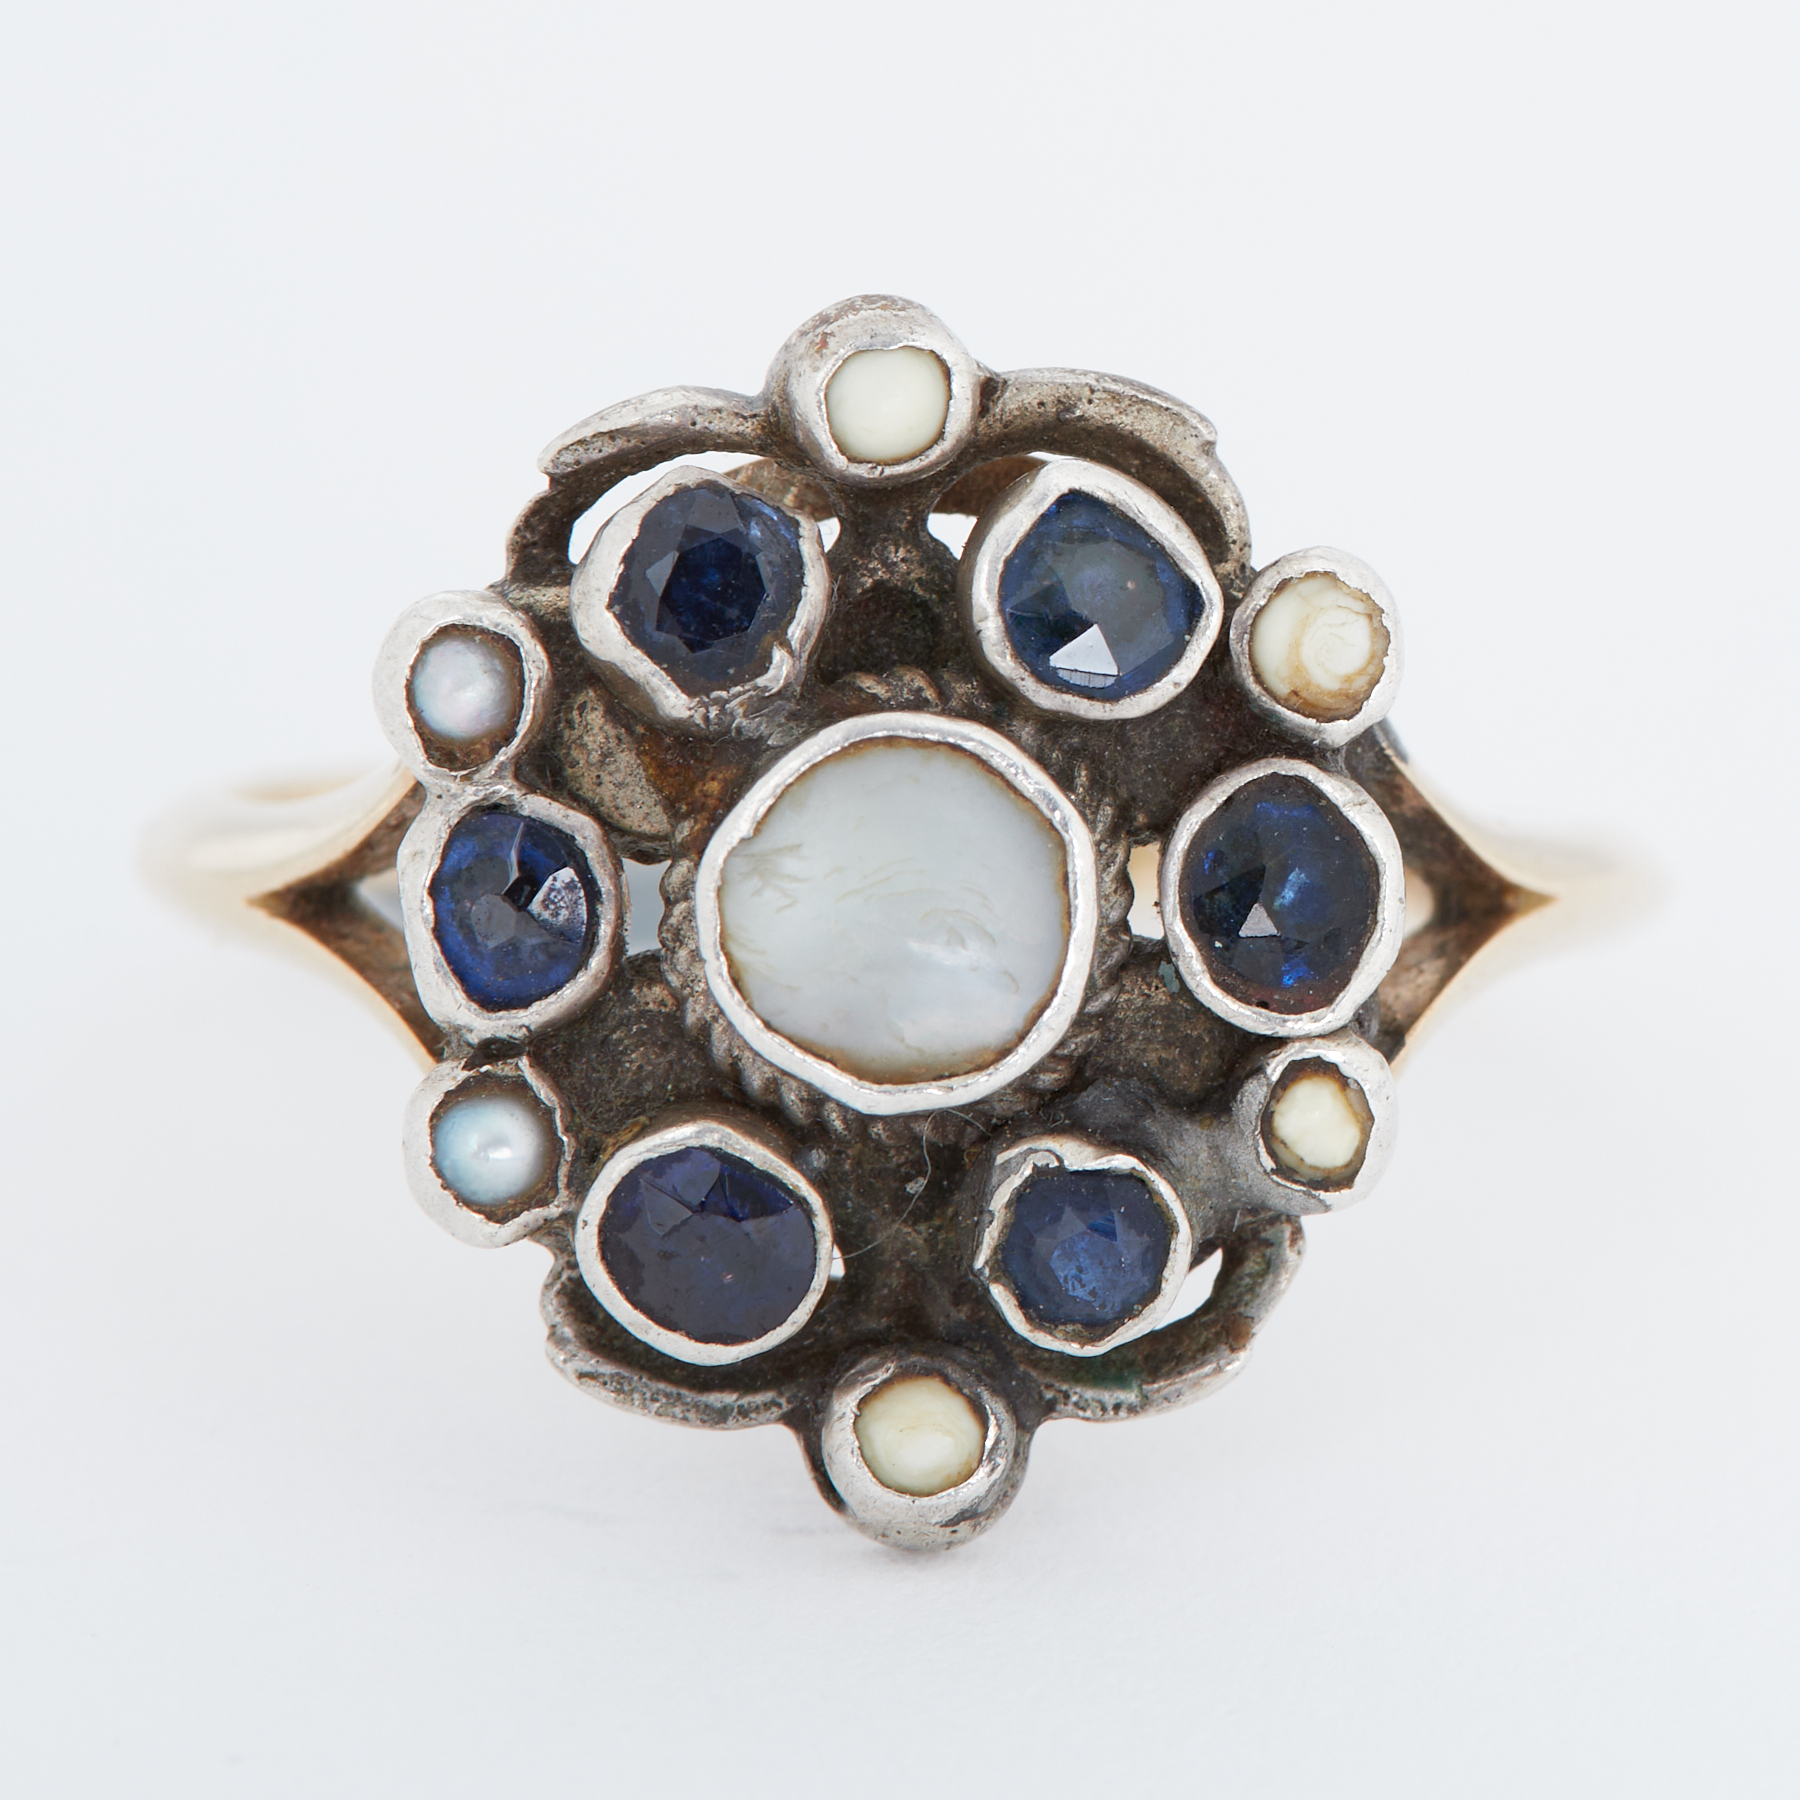 An Arts & Crafts yellow gold & white metal ring set with small round cut sapphires & pearls, the